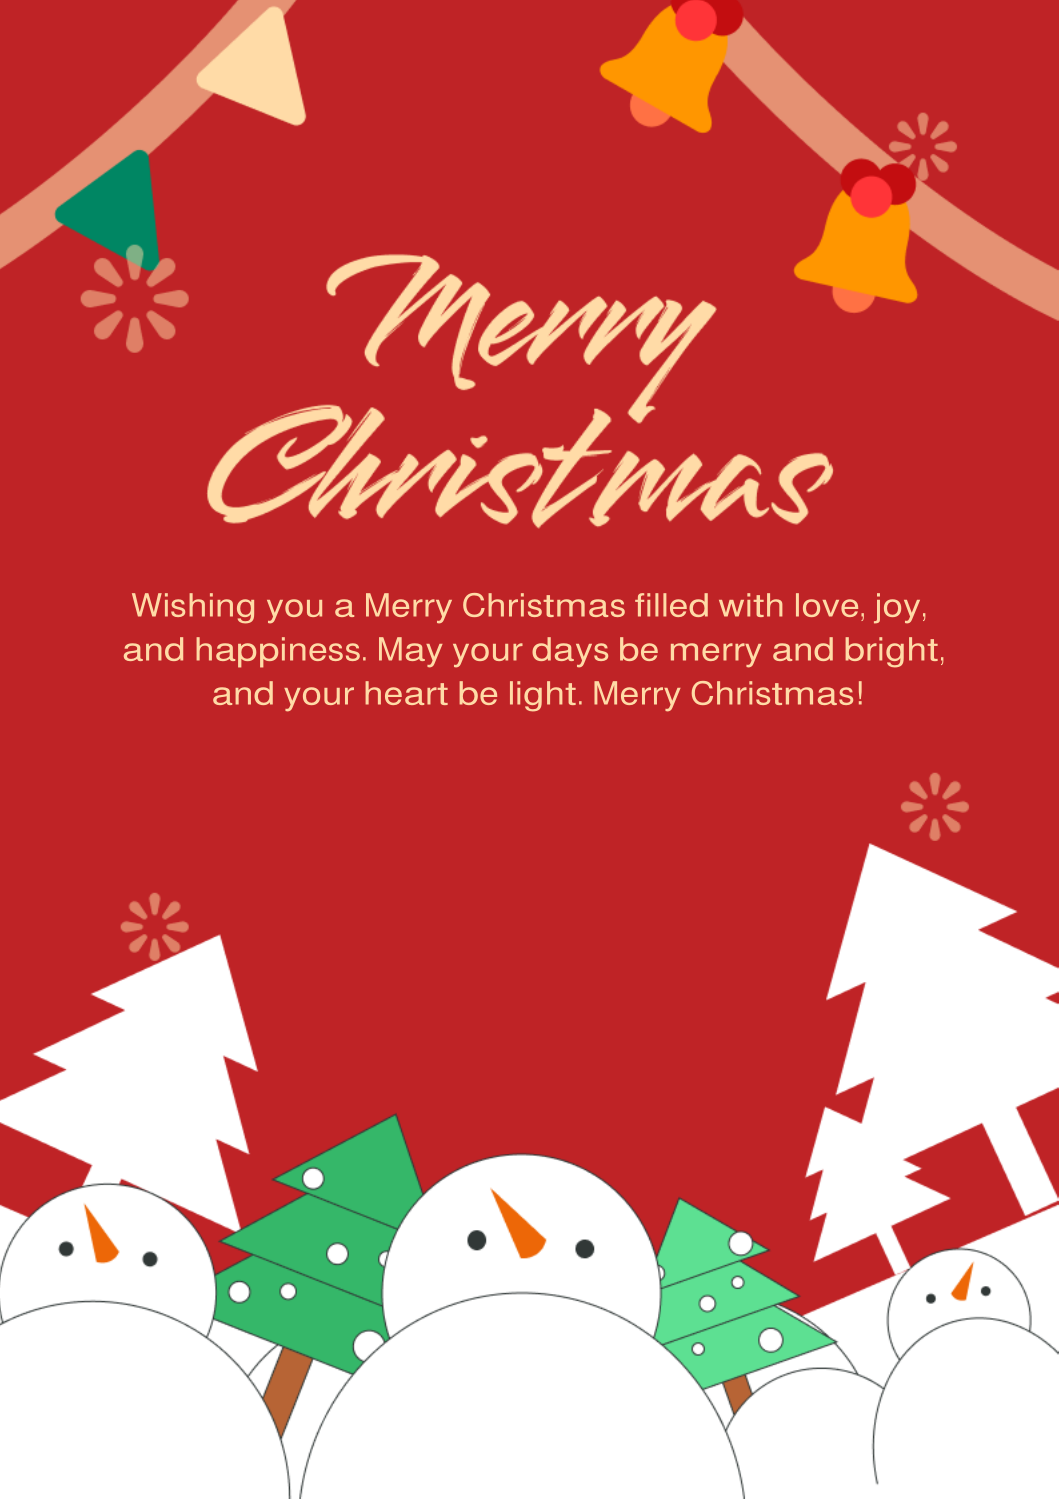 Merry Christmas wishes for colleagues